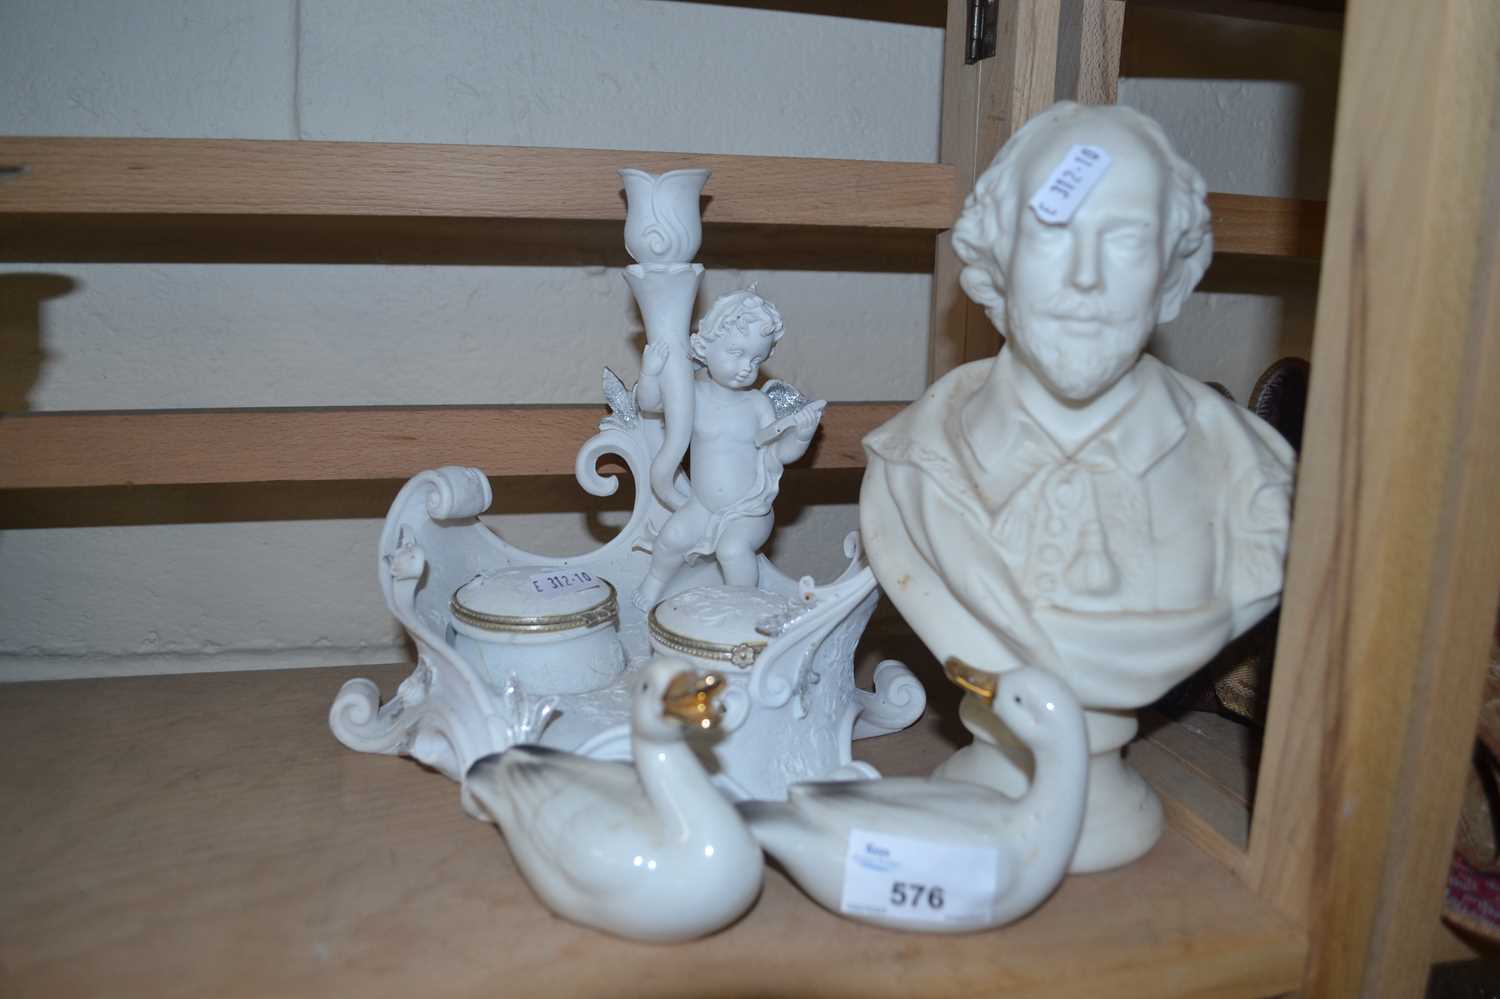 Pottery bust of Shakespeare together with a dressing table stand and two ceramic geese